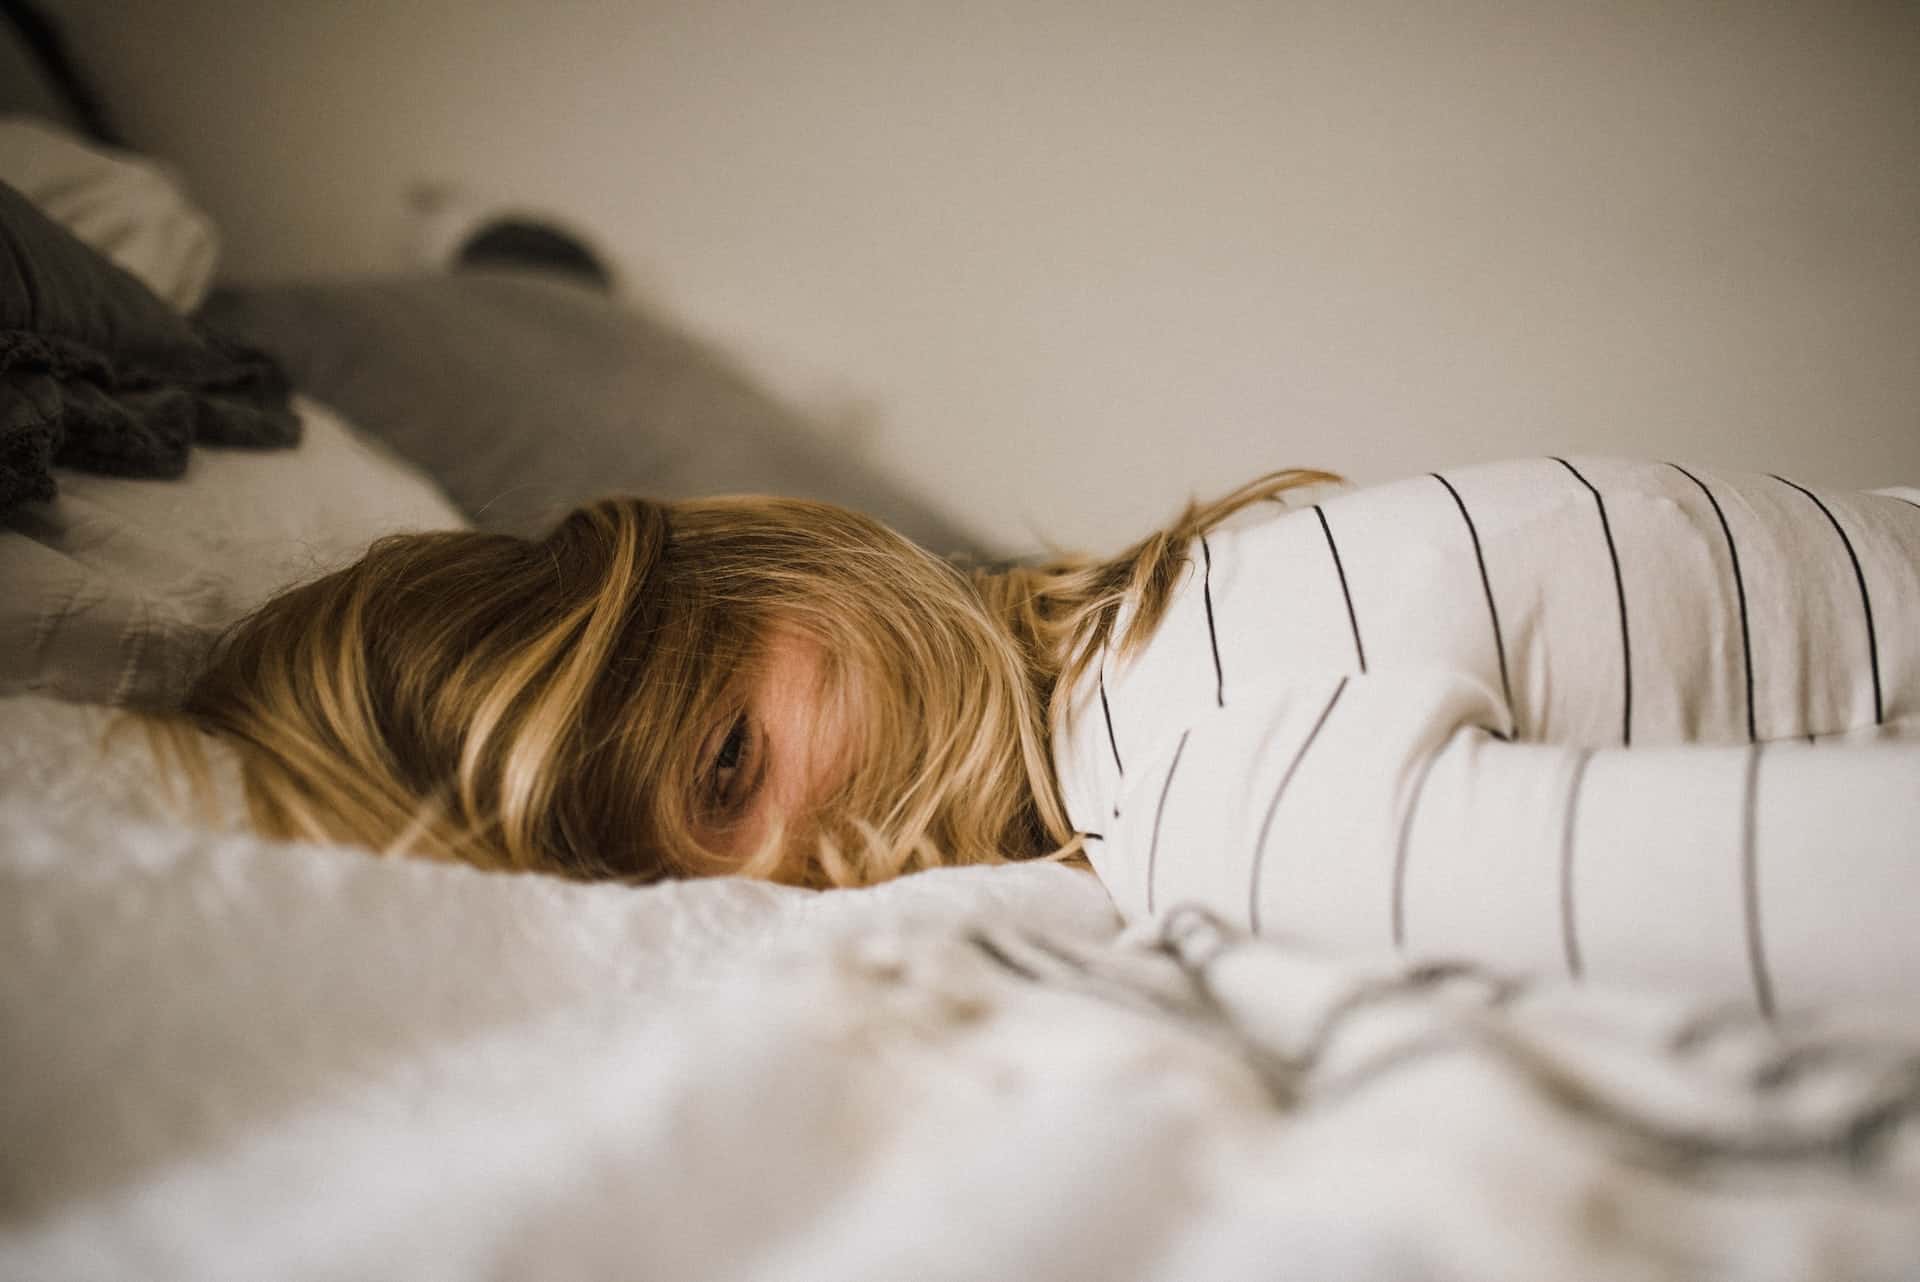 The most effective ways to hide fatigue